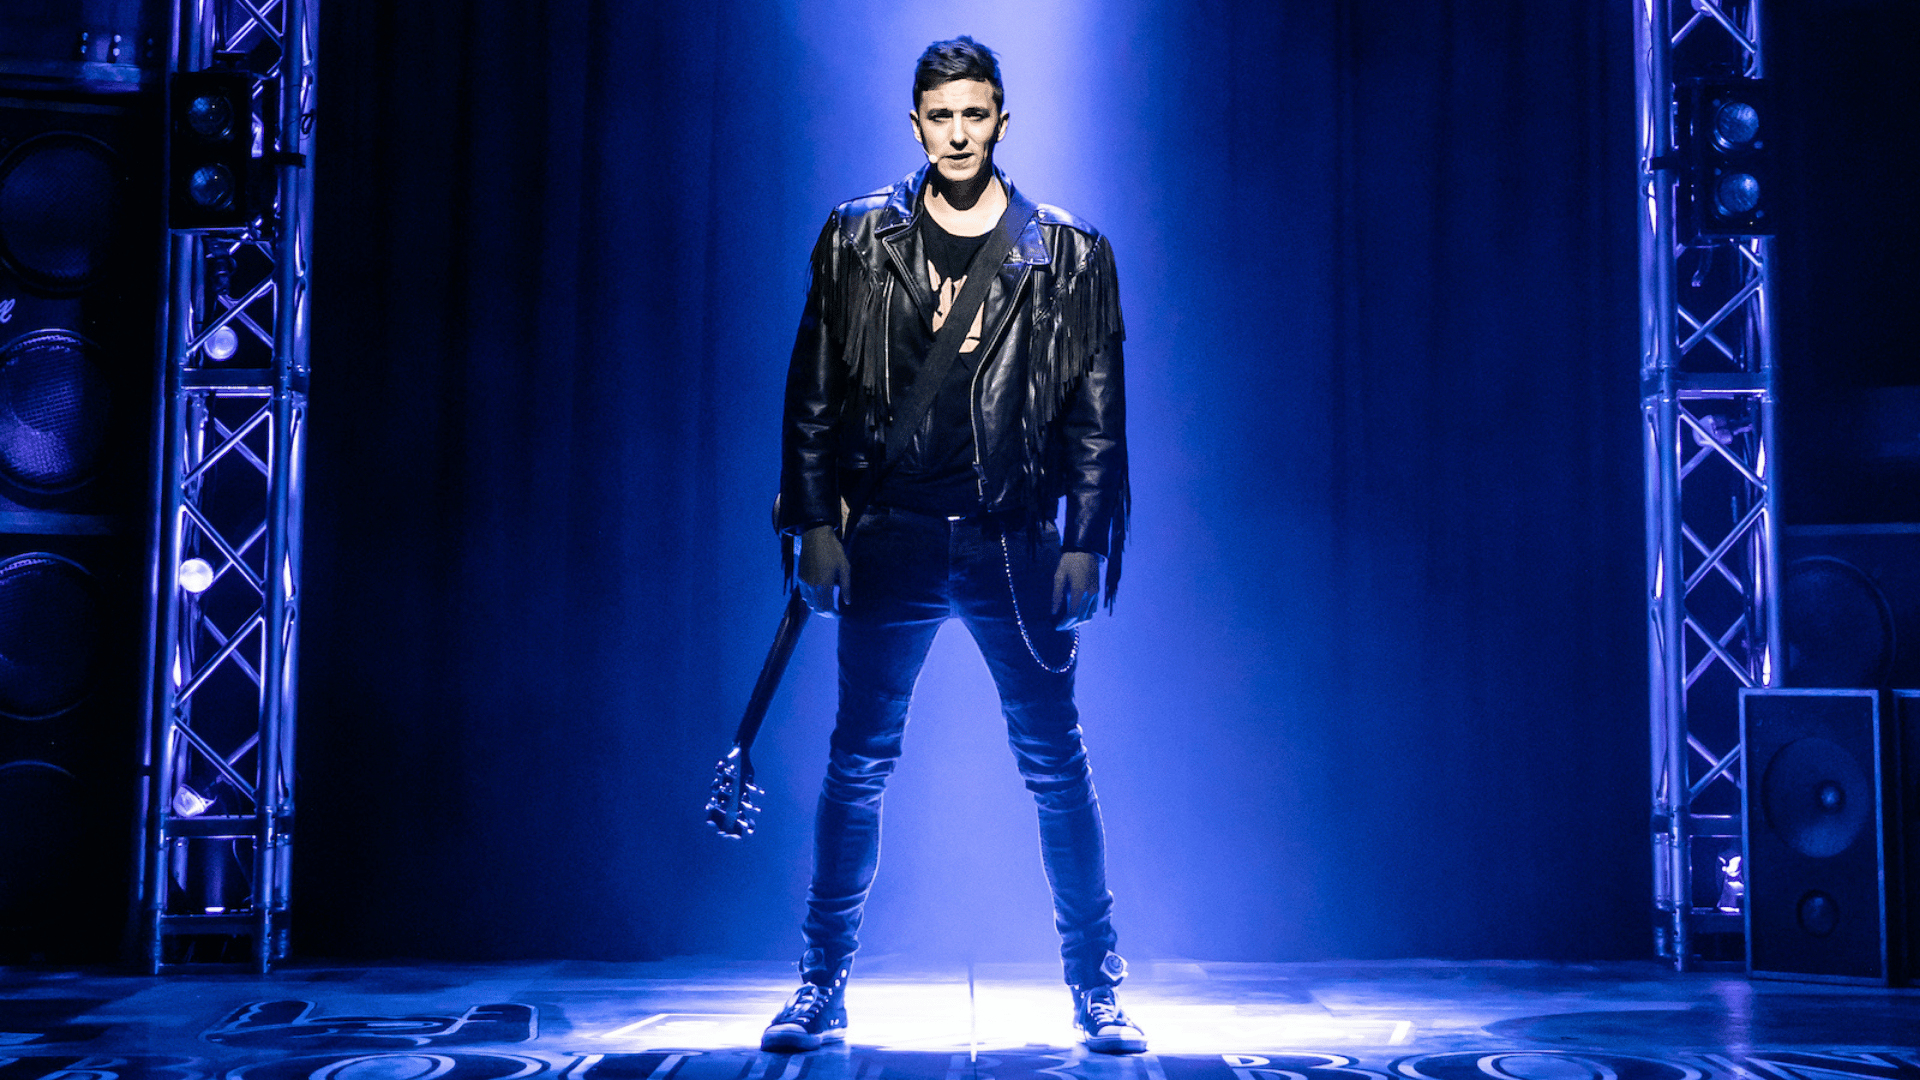 Rock of Ages production shot: the lead male actor stand alone on stage in a spotlight, carrying a guitar